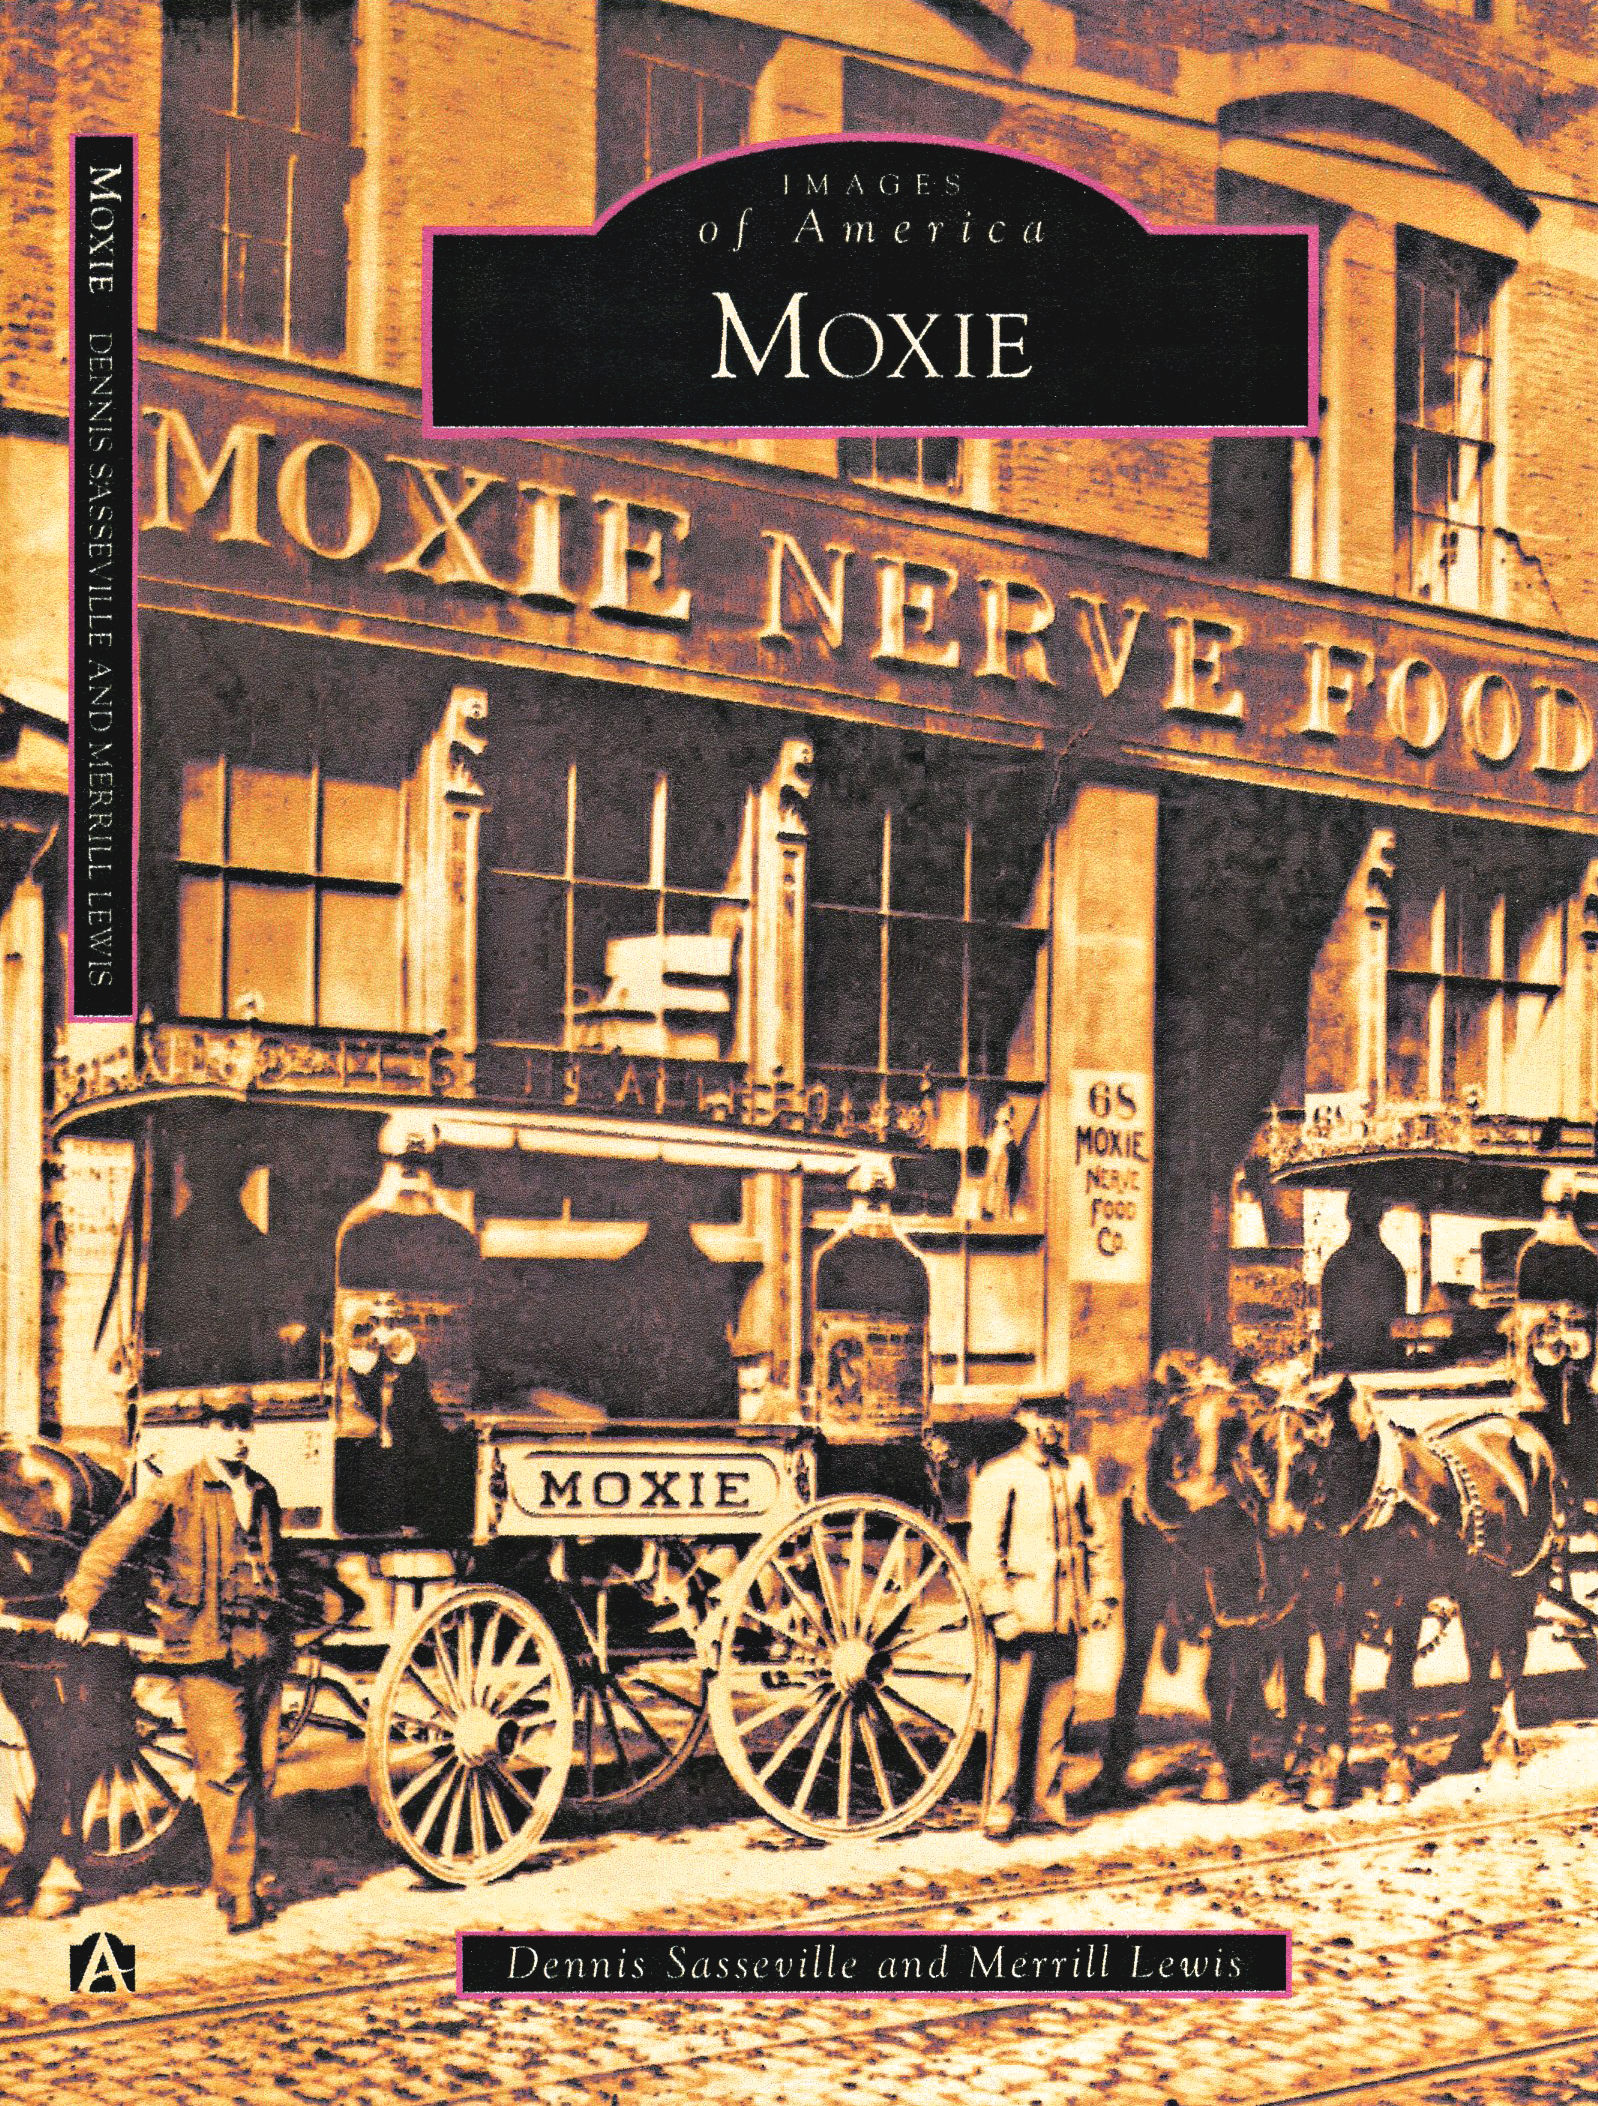 New England Moxie Congress Home Page